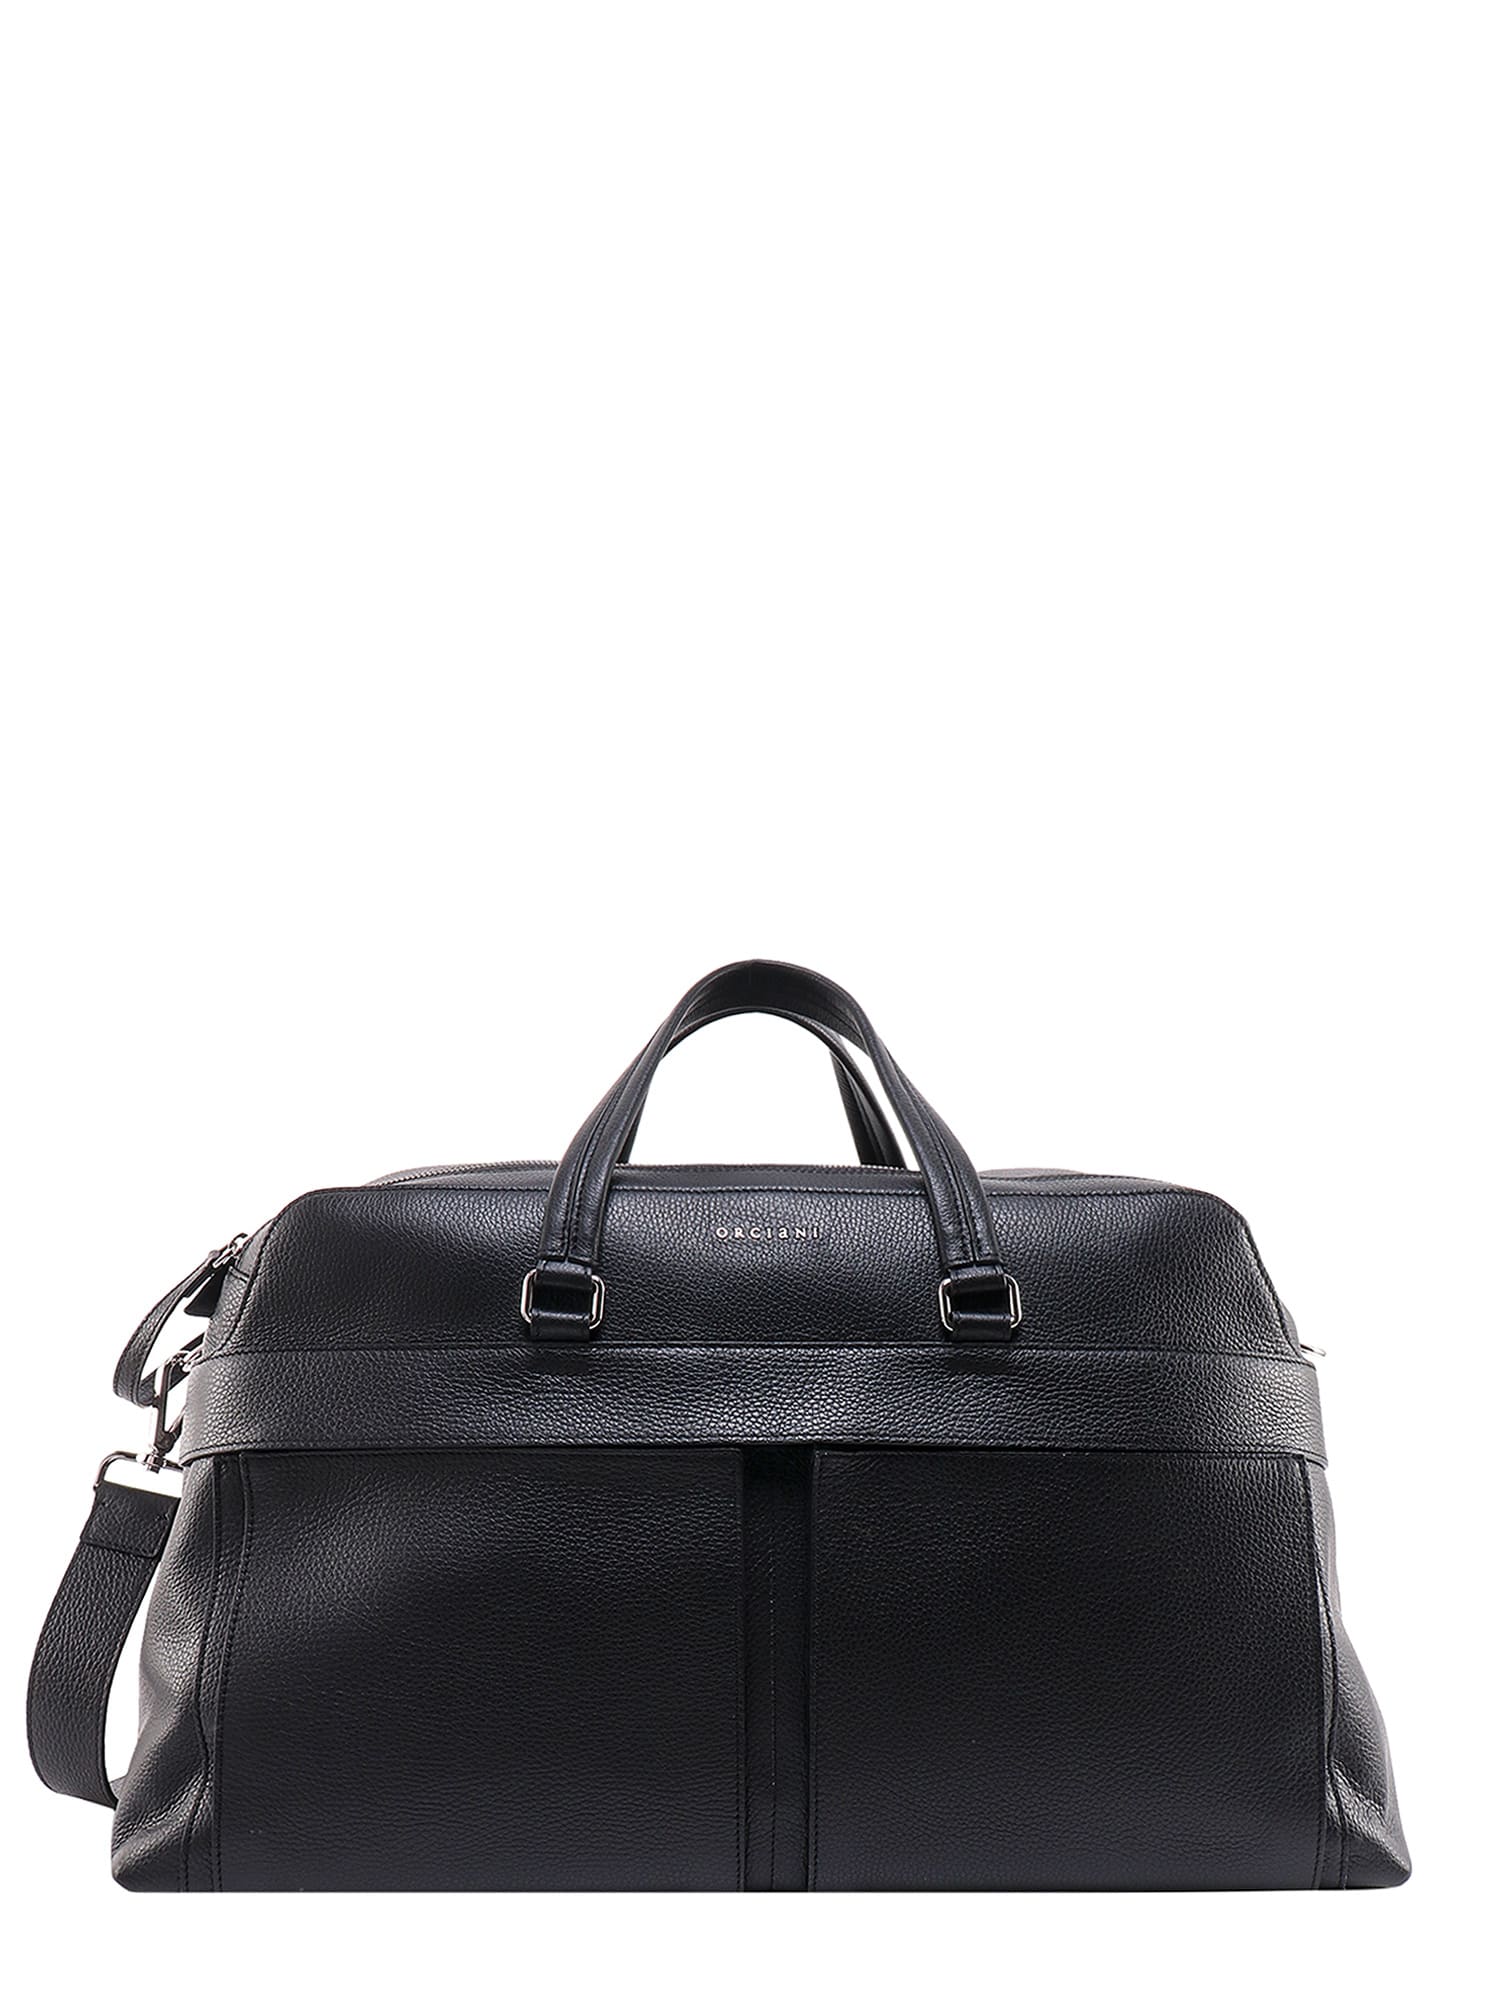 Orciani Duffle Bag In Black